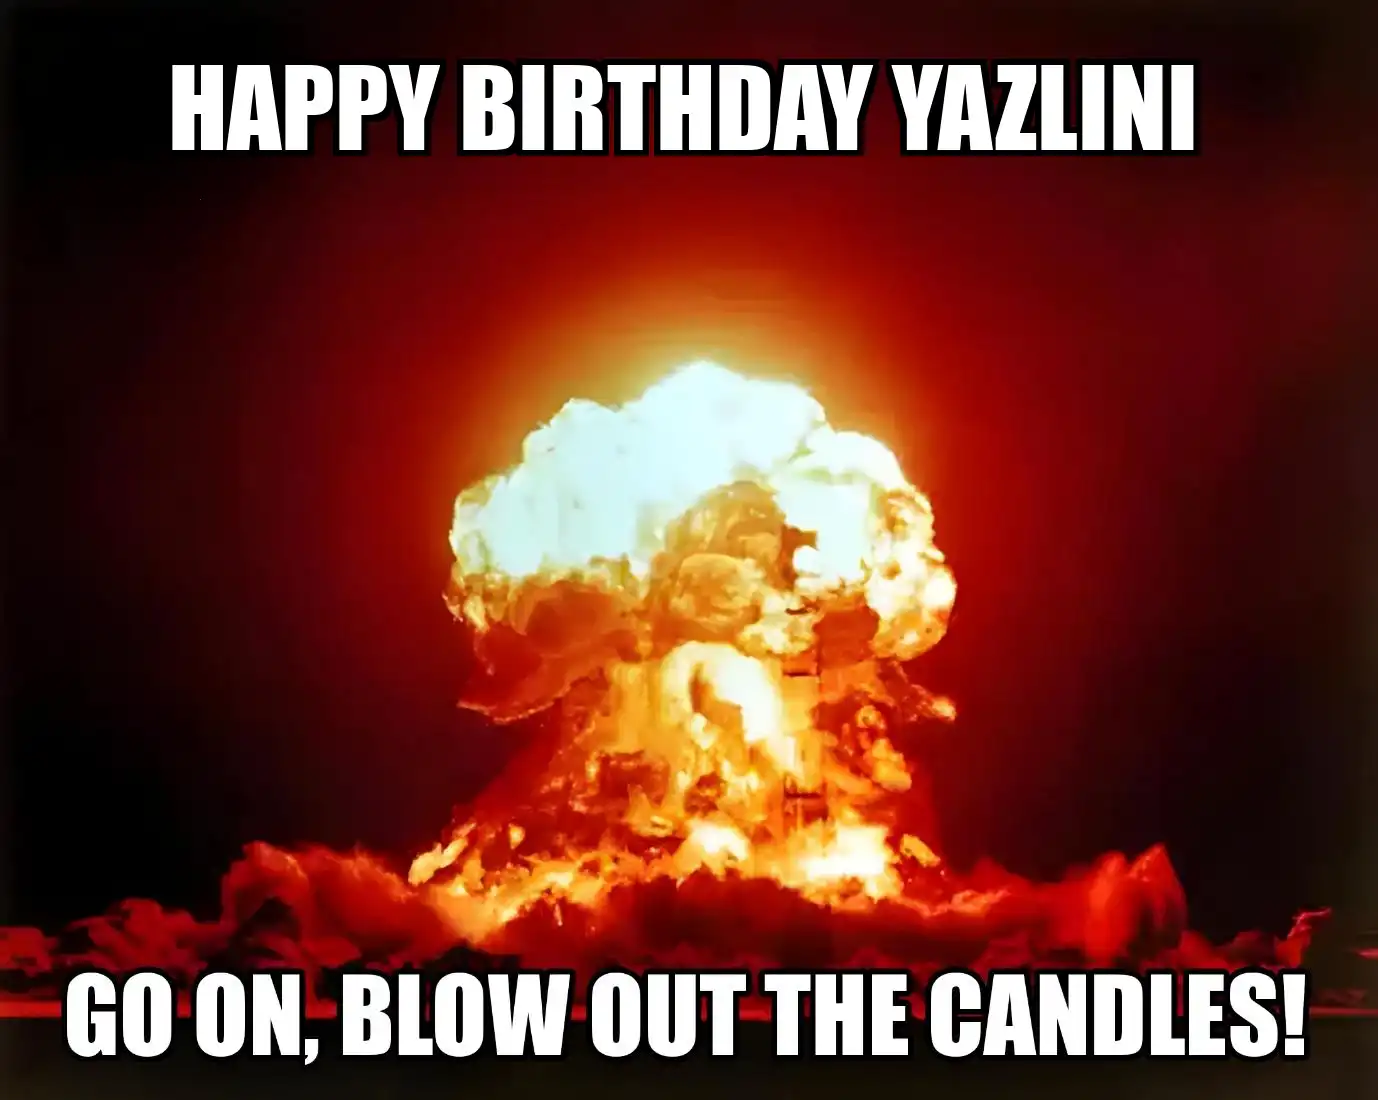 Happy Birthday Yazlini Go On Blow Out The Candles Meme